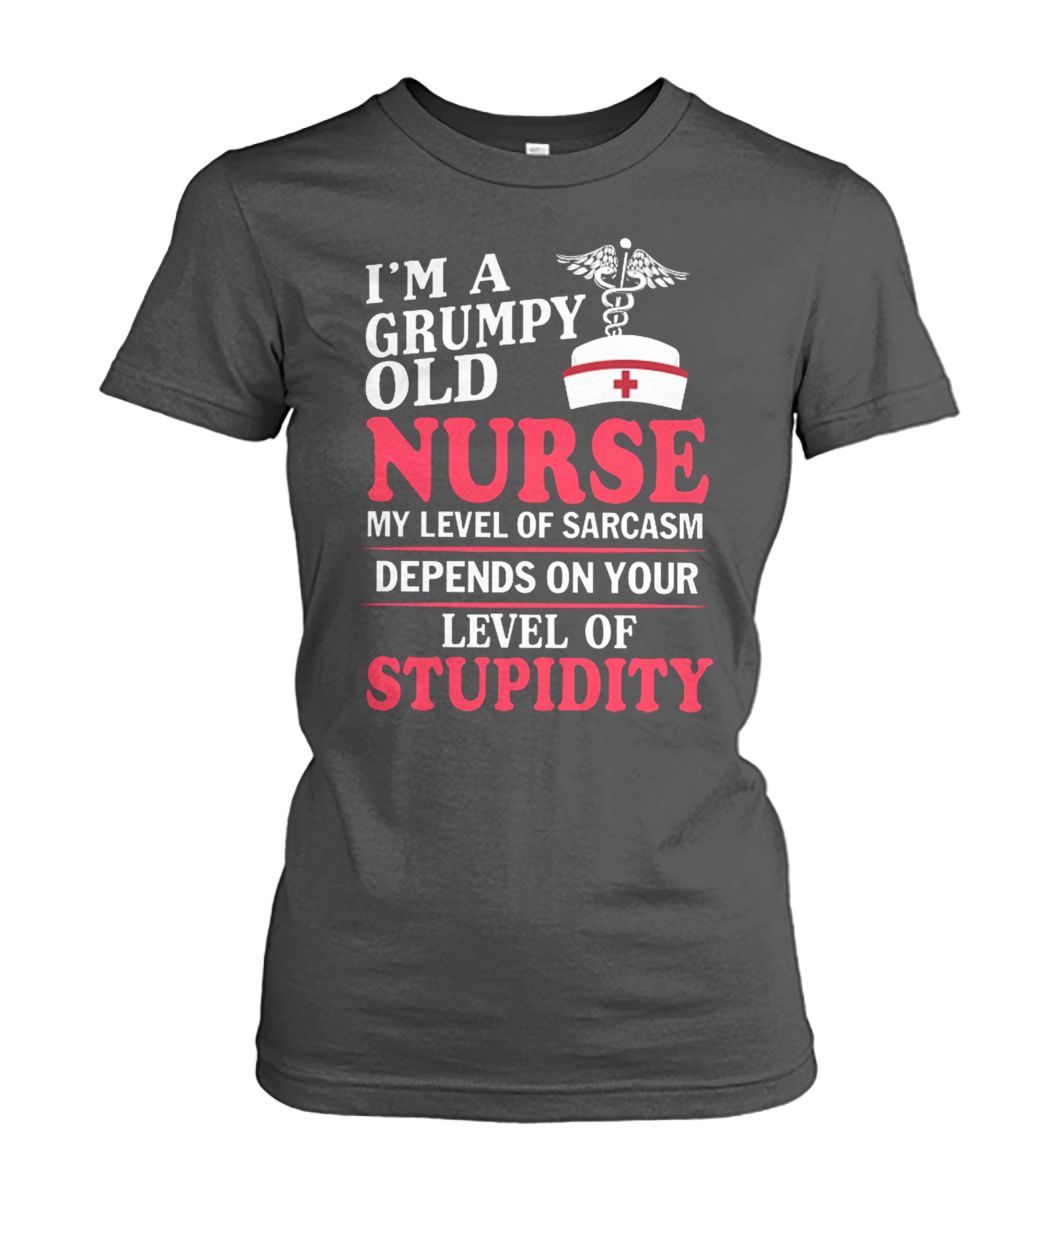 I’m a grumpy old nurse my level of sarcasm depends on your level of stupidity women's crew tee